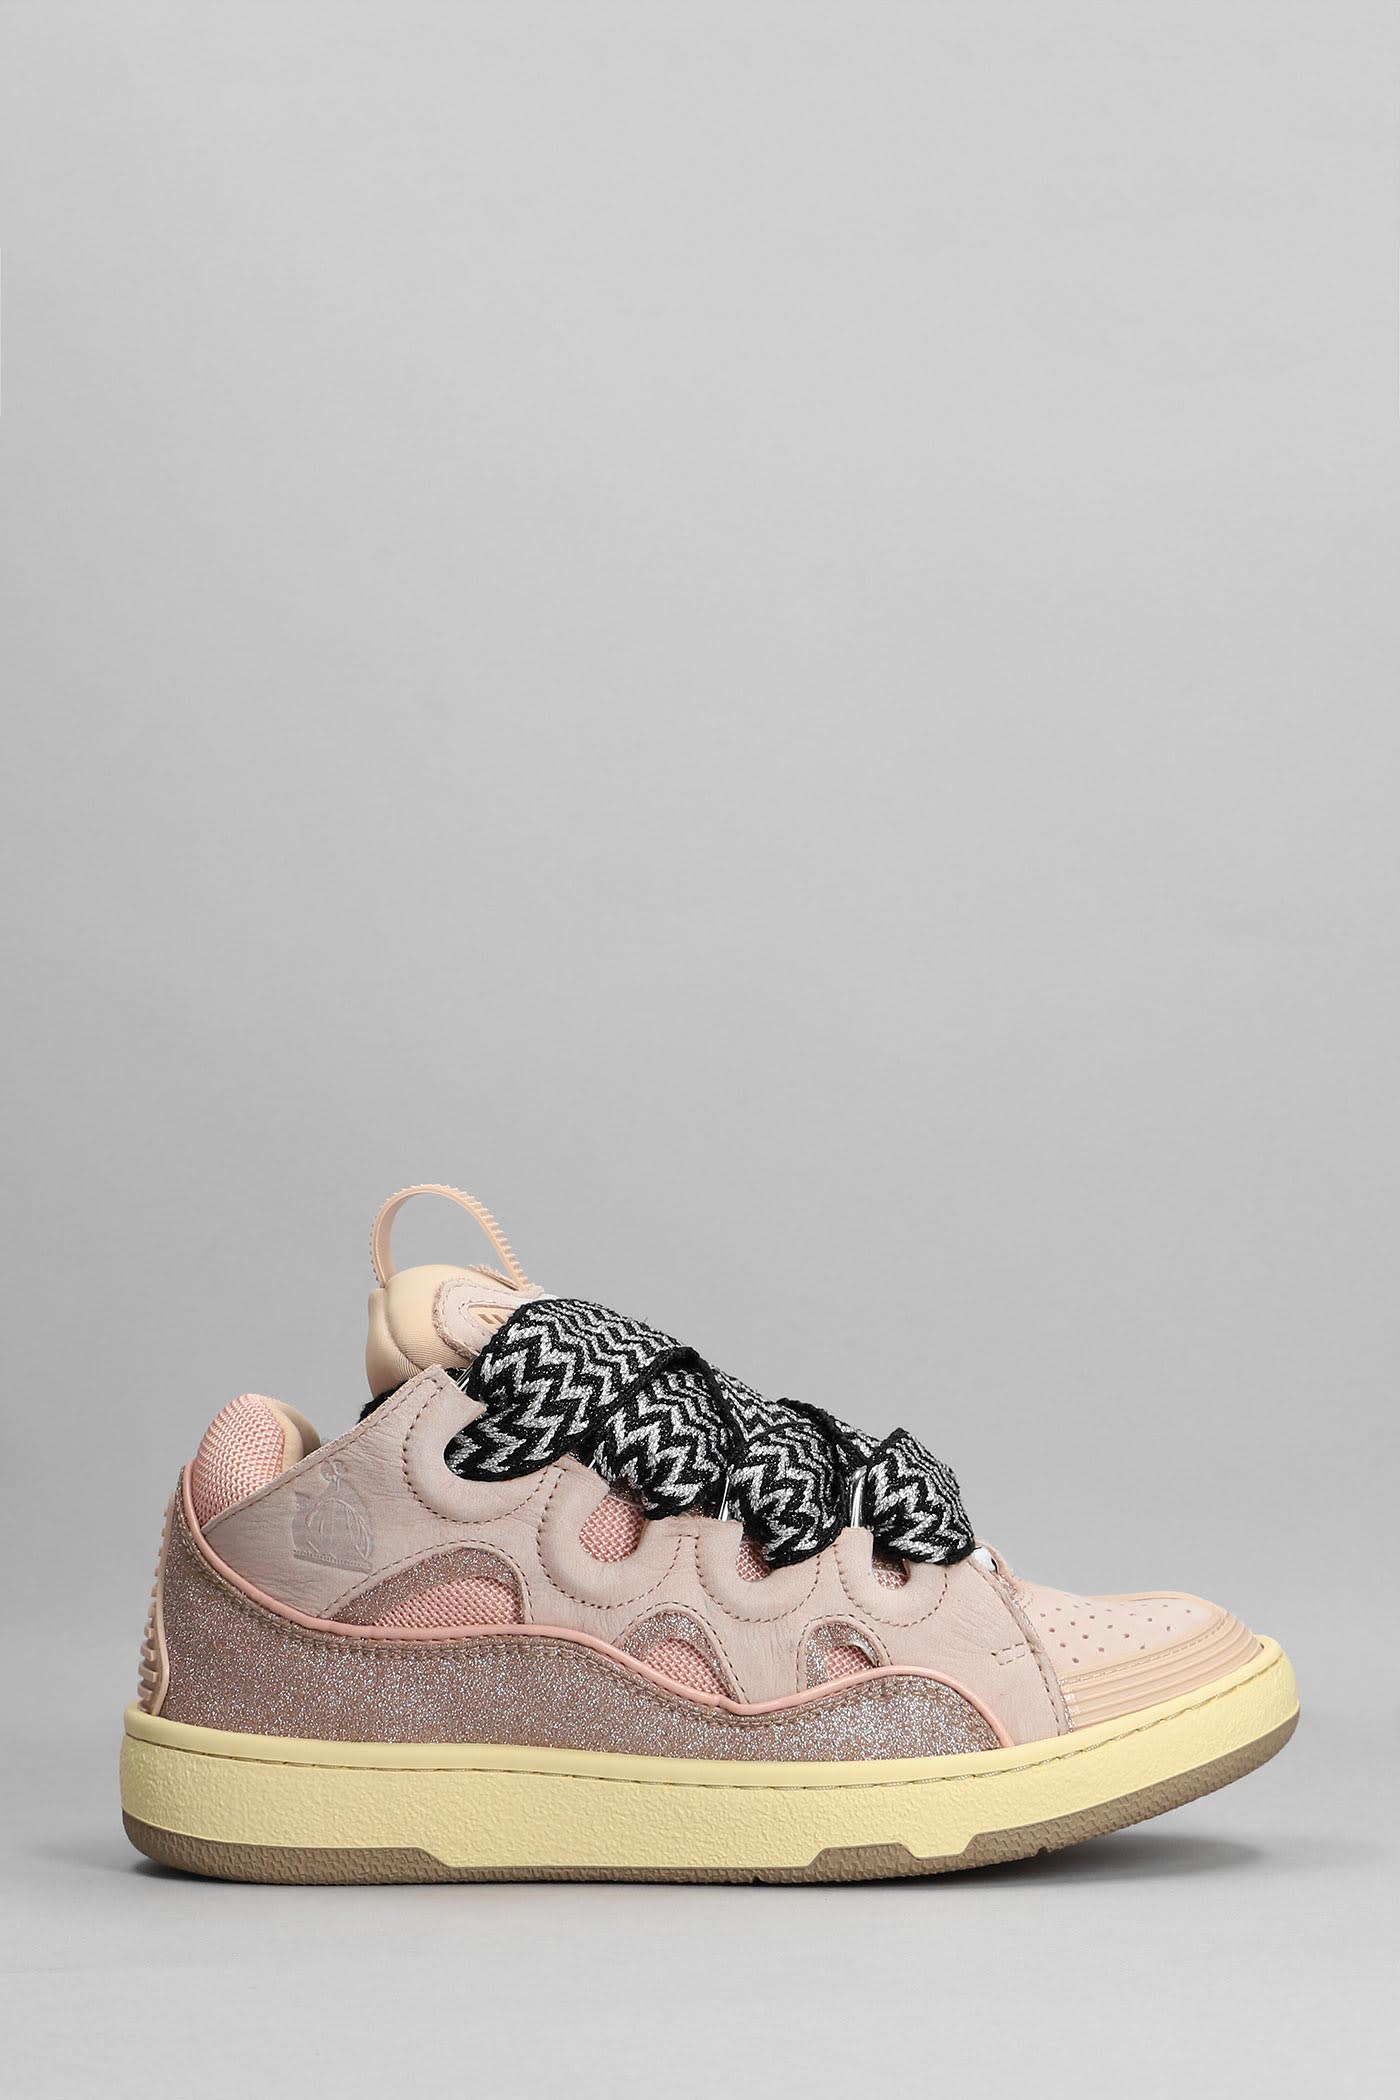 Lanvin Curb Sneakers In Rose-pink Leather